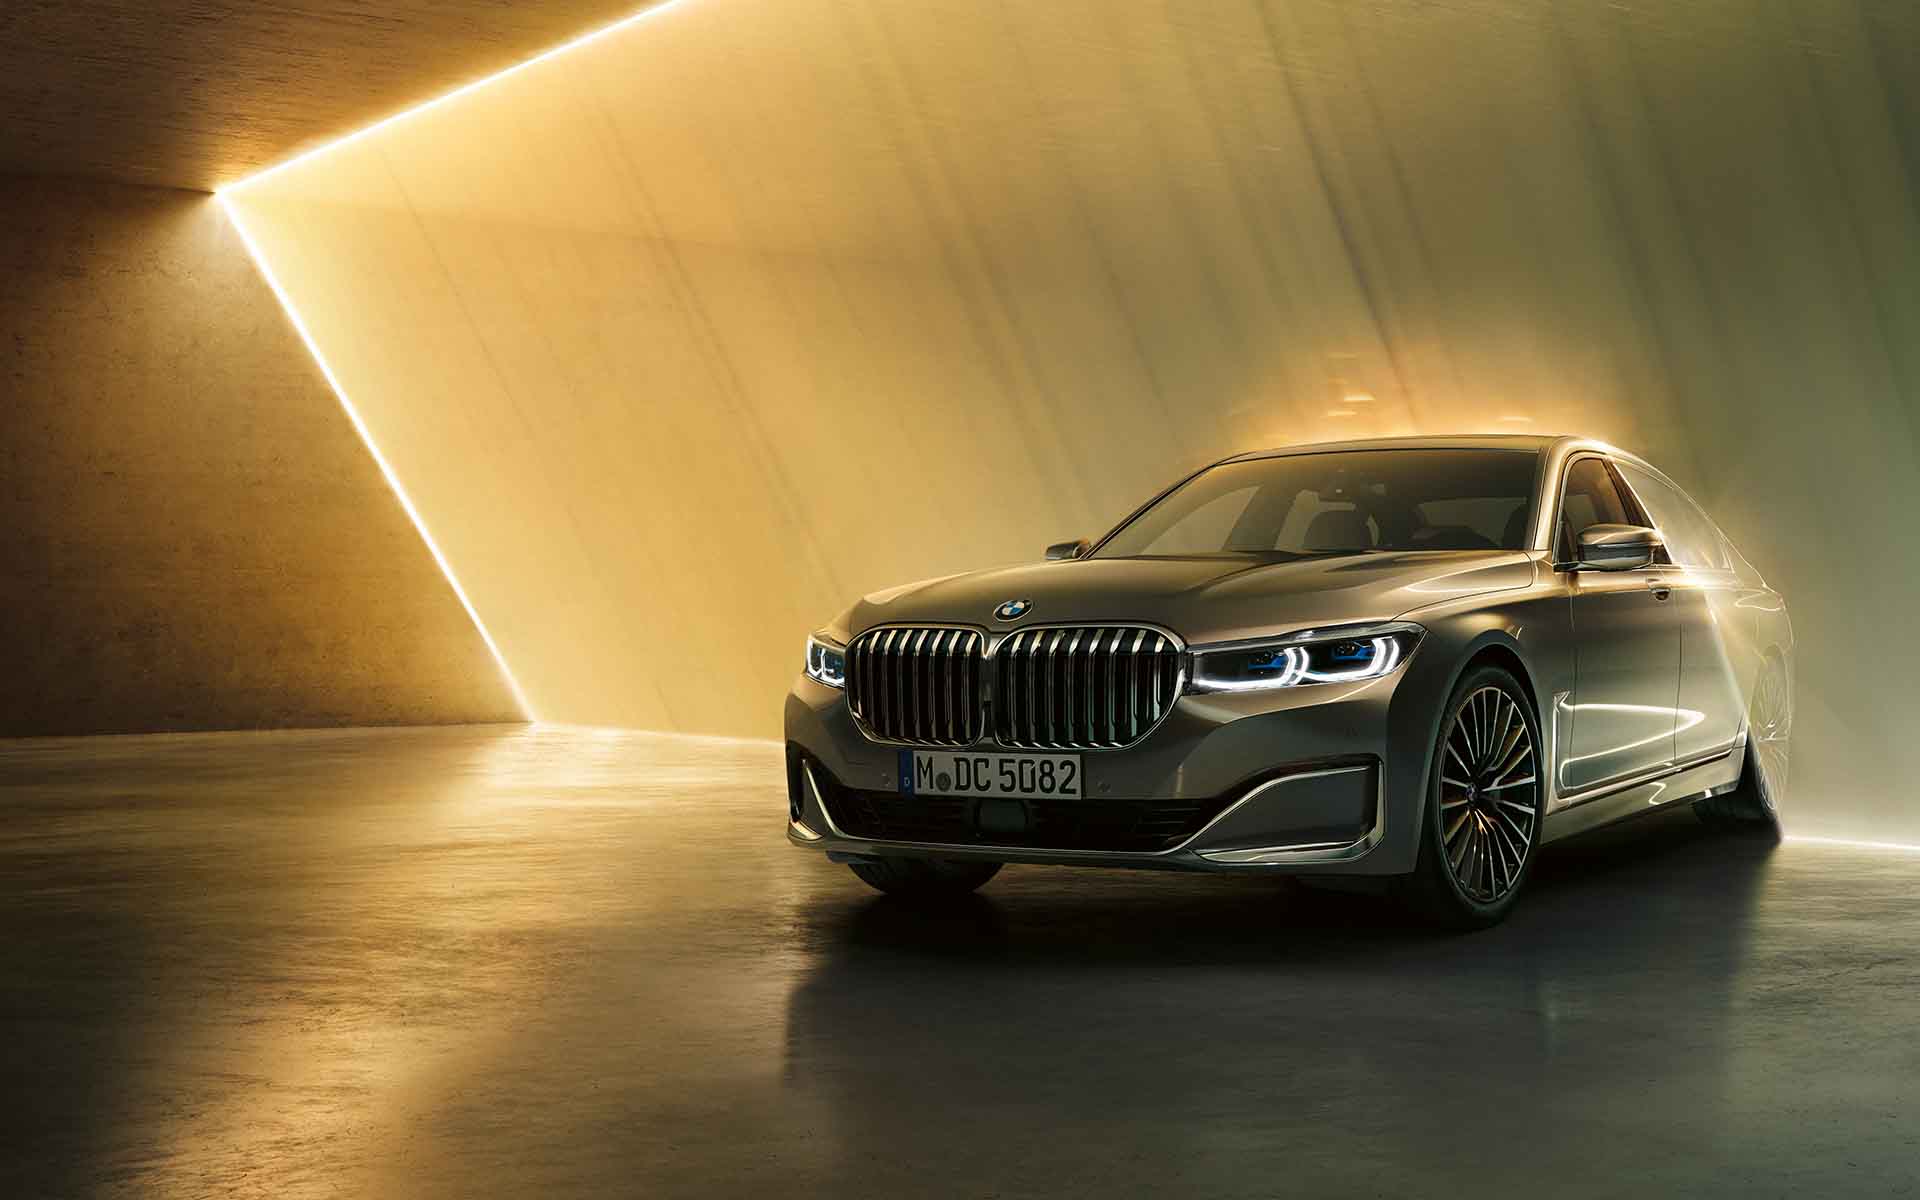 The BMW 7 Series